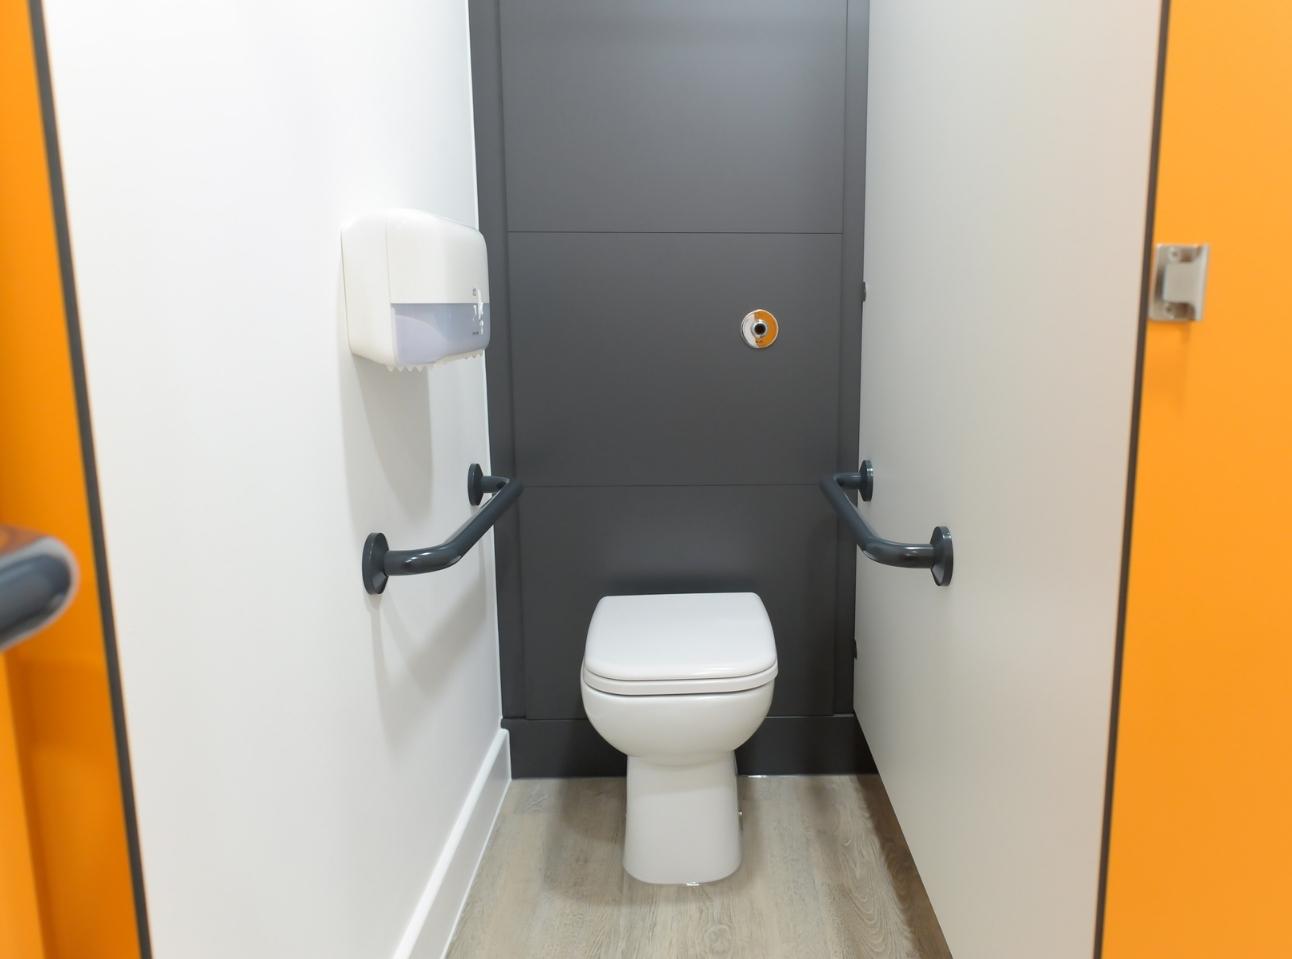 Settle Group Office Toilet Room Refurbishment | Case Study | Commercial Washrooms